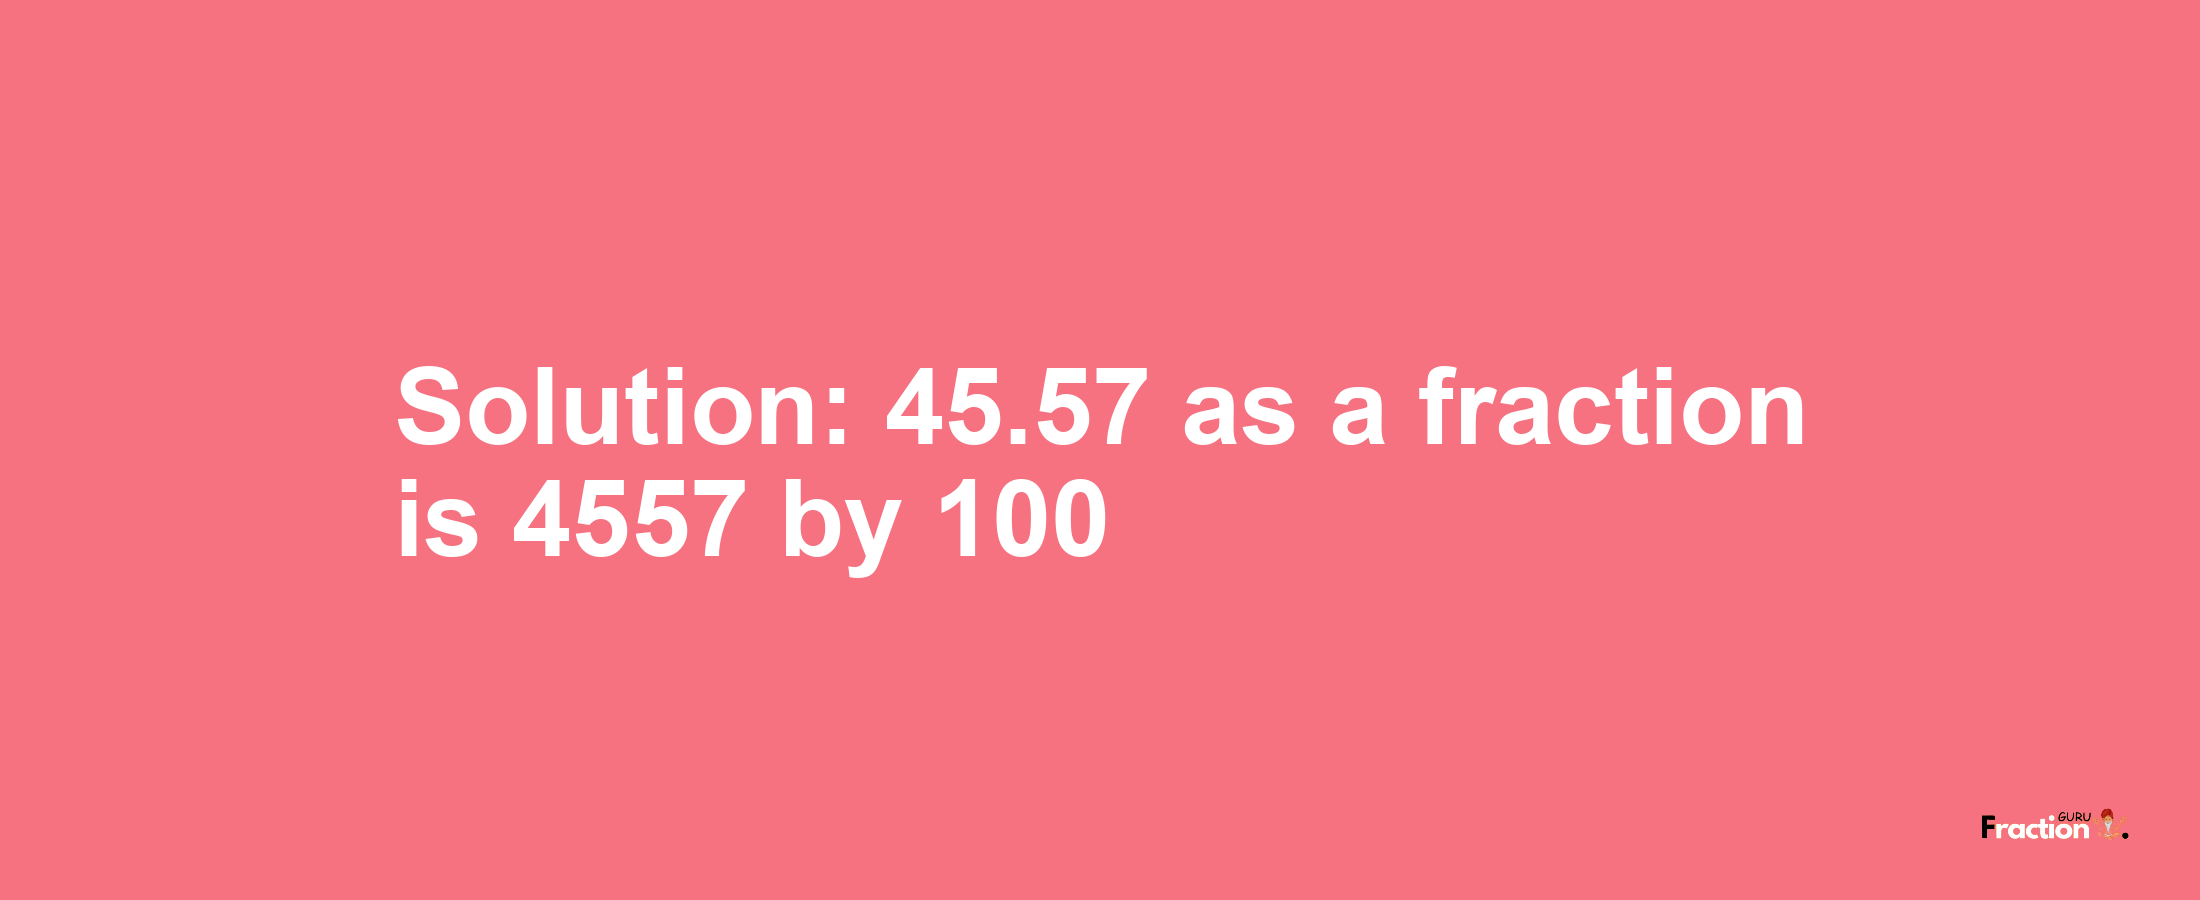 Solution:45.57 as a fraction is 4557/100